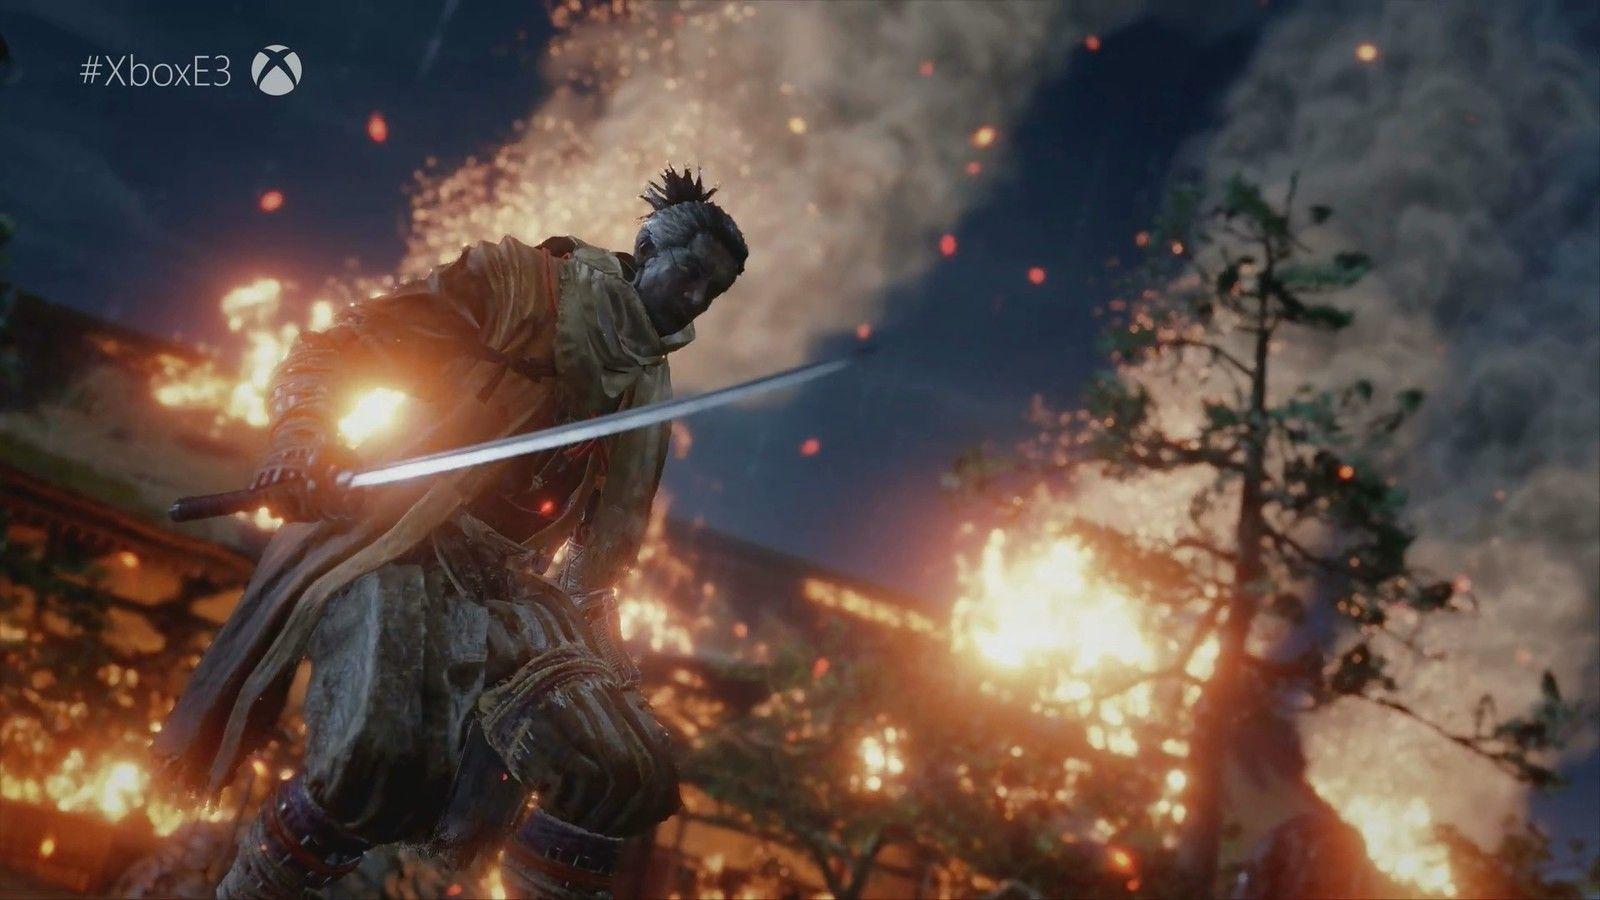 Sekiro: Shadows Die Twice' is coming to Xbox, from Dark Souls